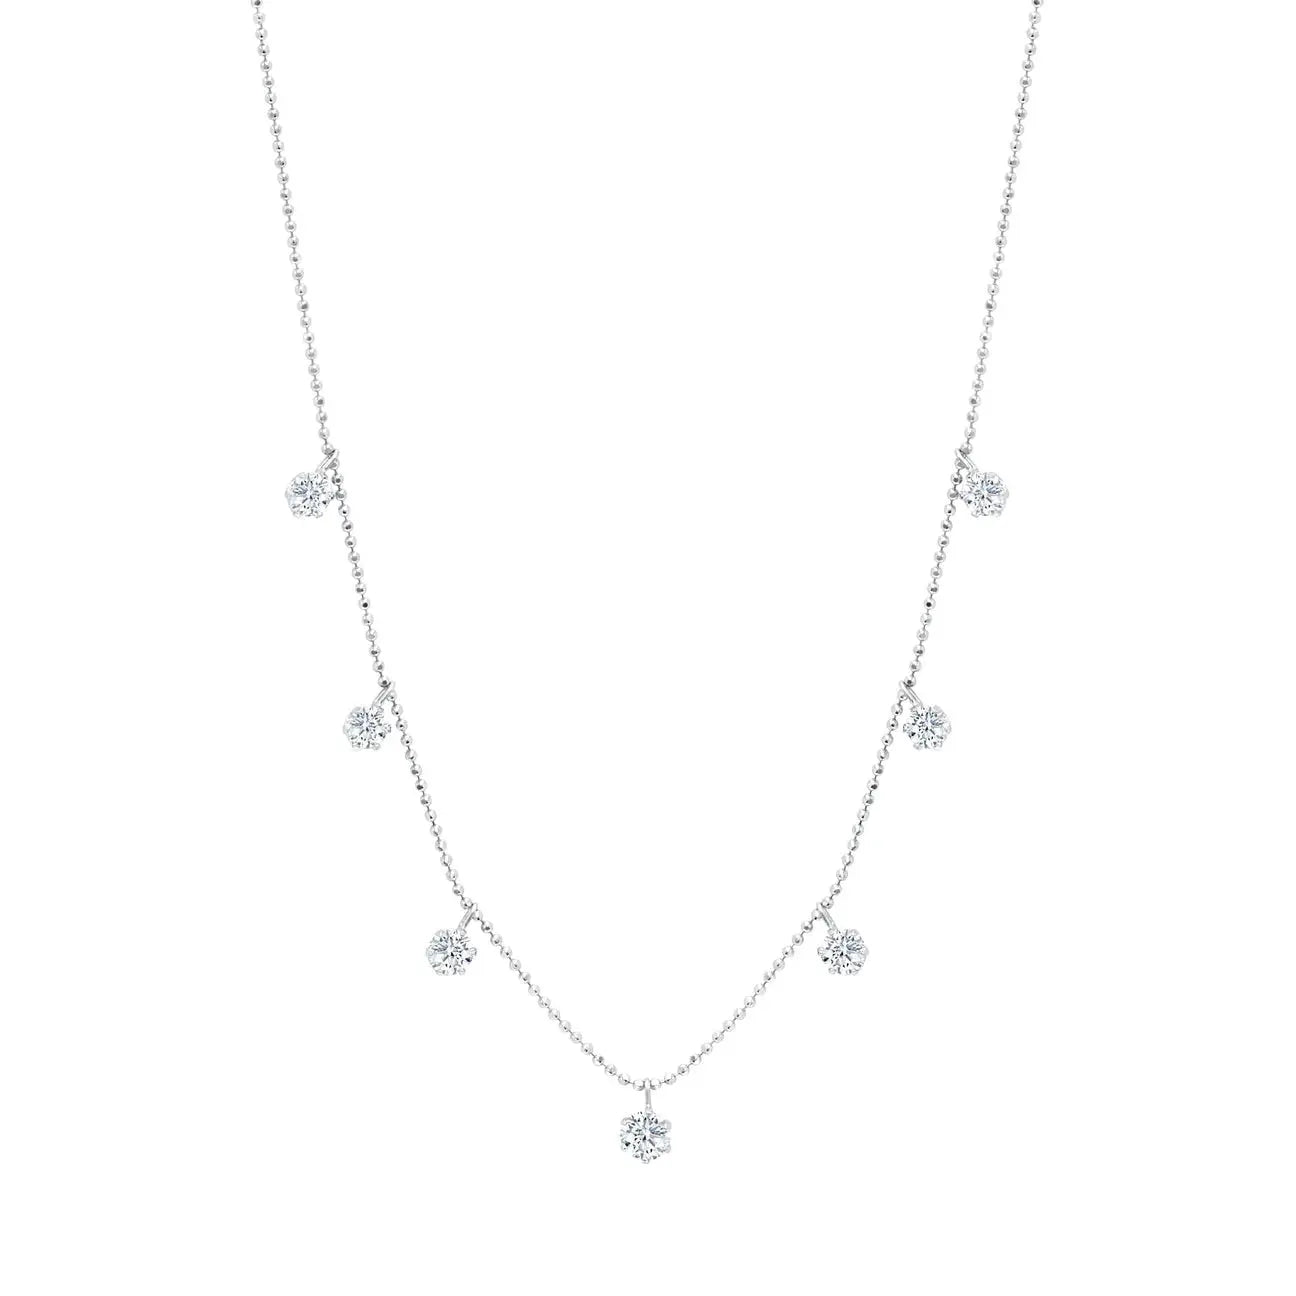 18k white gold Medium Floating Diamond Necklace with 1.52 cttw of diamonds  Gemstone:  1.52 Carats of G-H Color White Diamonds Metal: 18K Gold, 2.94 Grams Colors: Yellow Gold, White Gold, Rose Gold Sizing: 18 Inches Fully Adjustable Designed by Graziela Gems